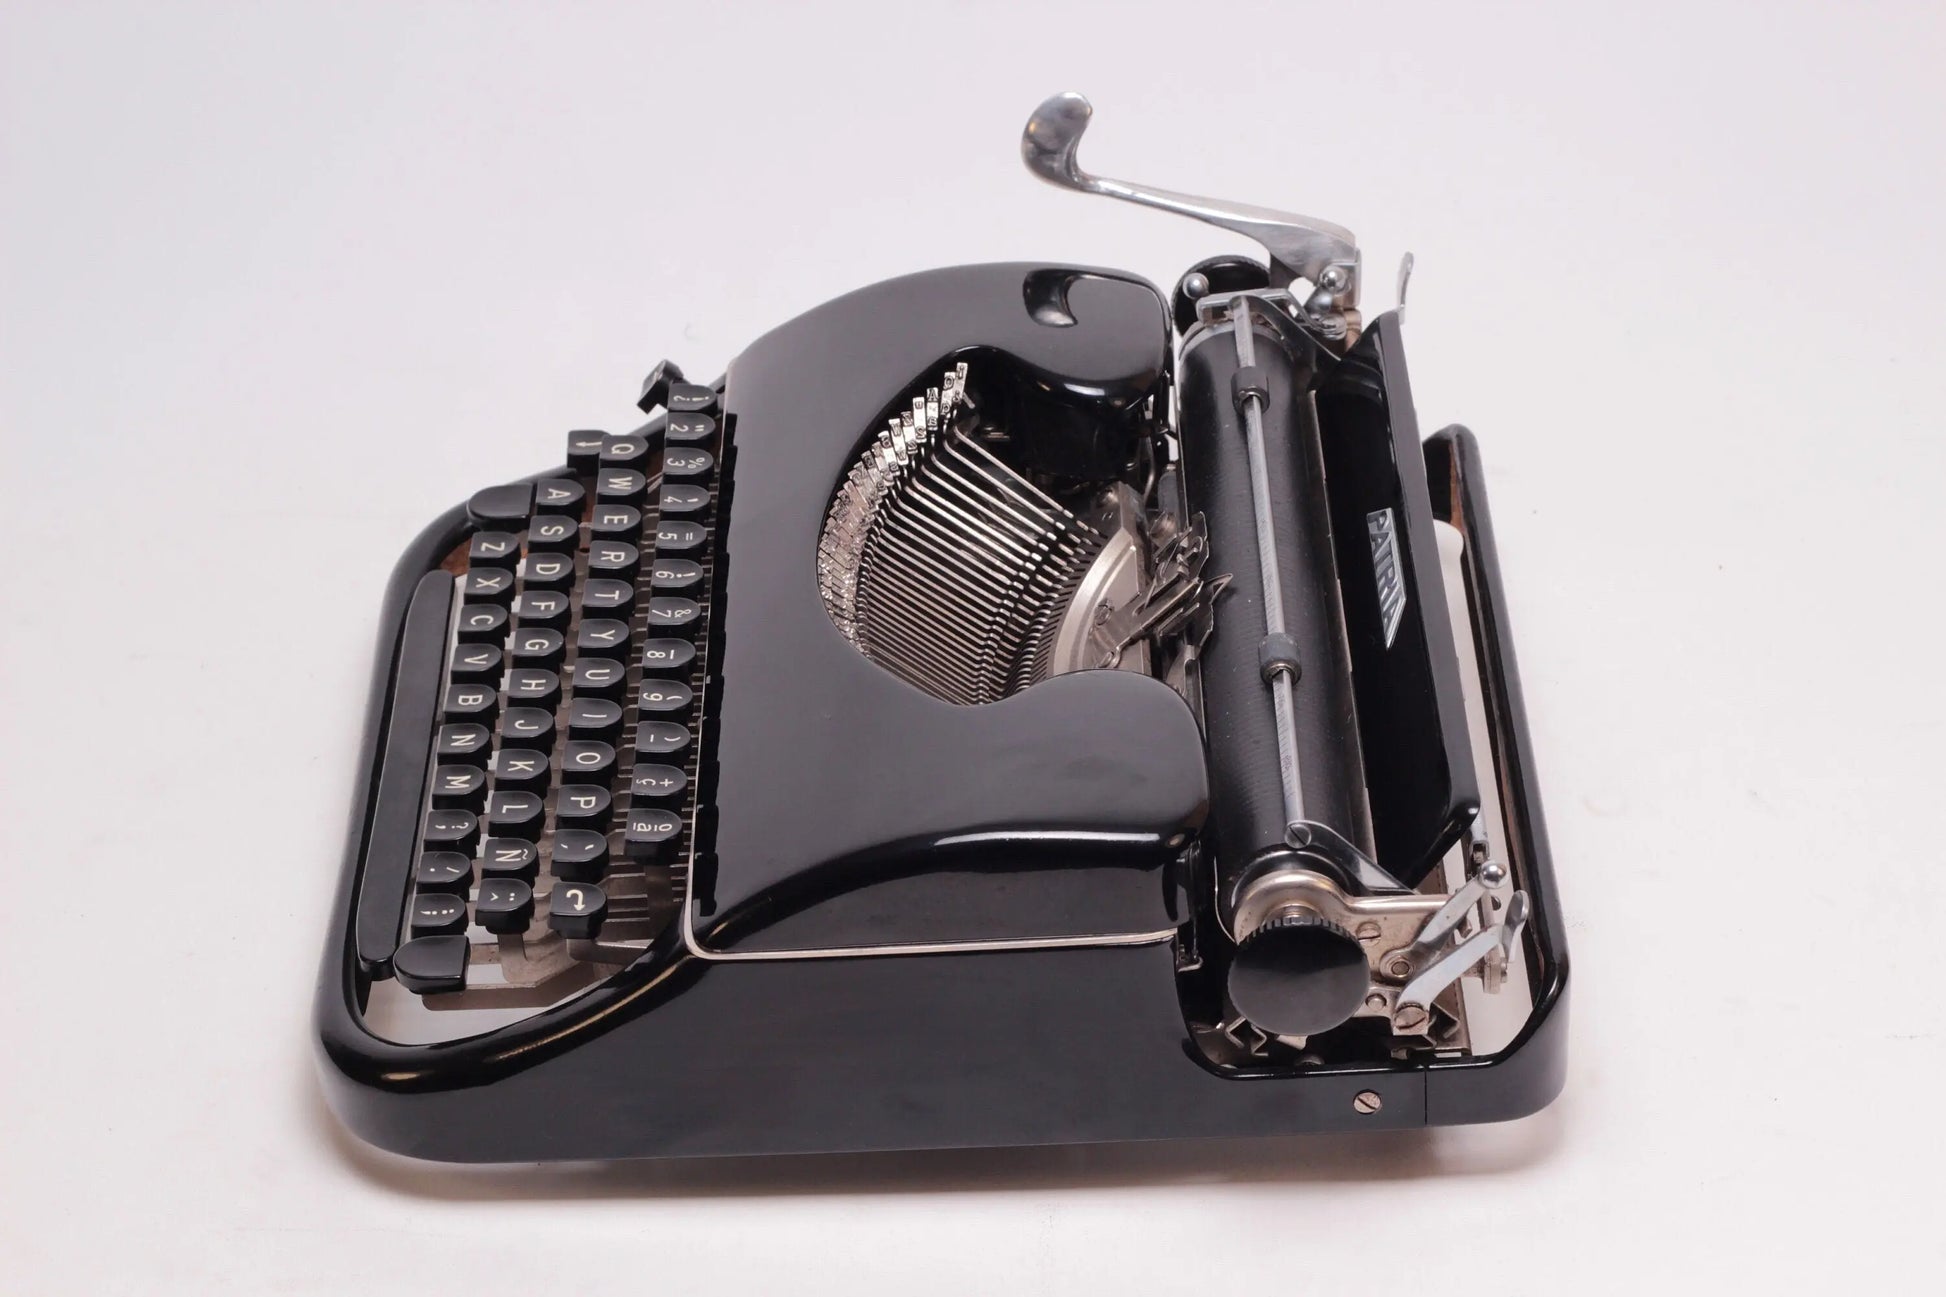 Limited Edition Patria Black Typewriter, Vintage, Mint Condition, Manual Portable, Professionally Serviced by Typewriter.Company - ElGranero Typewriter.Company